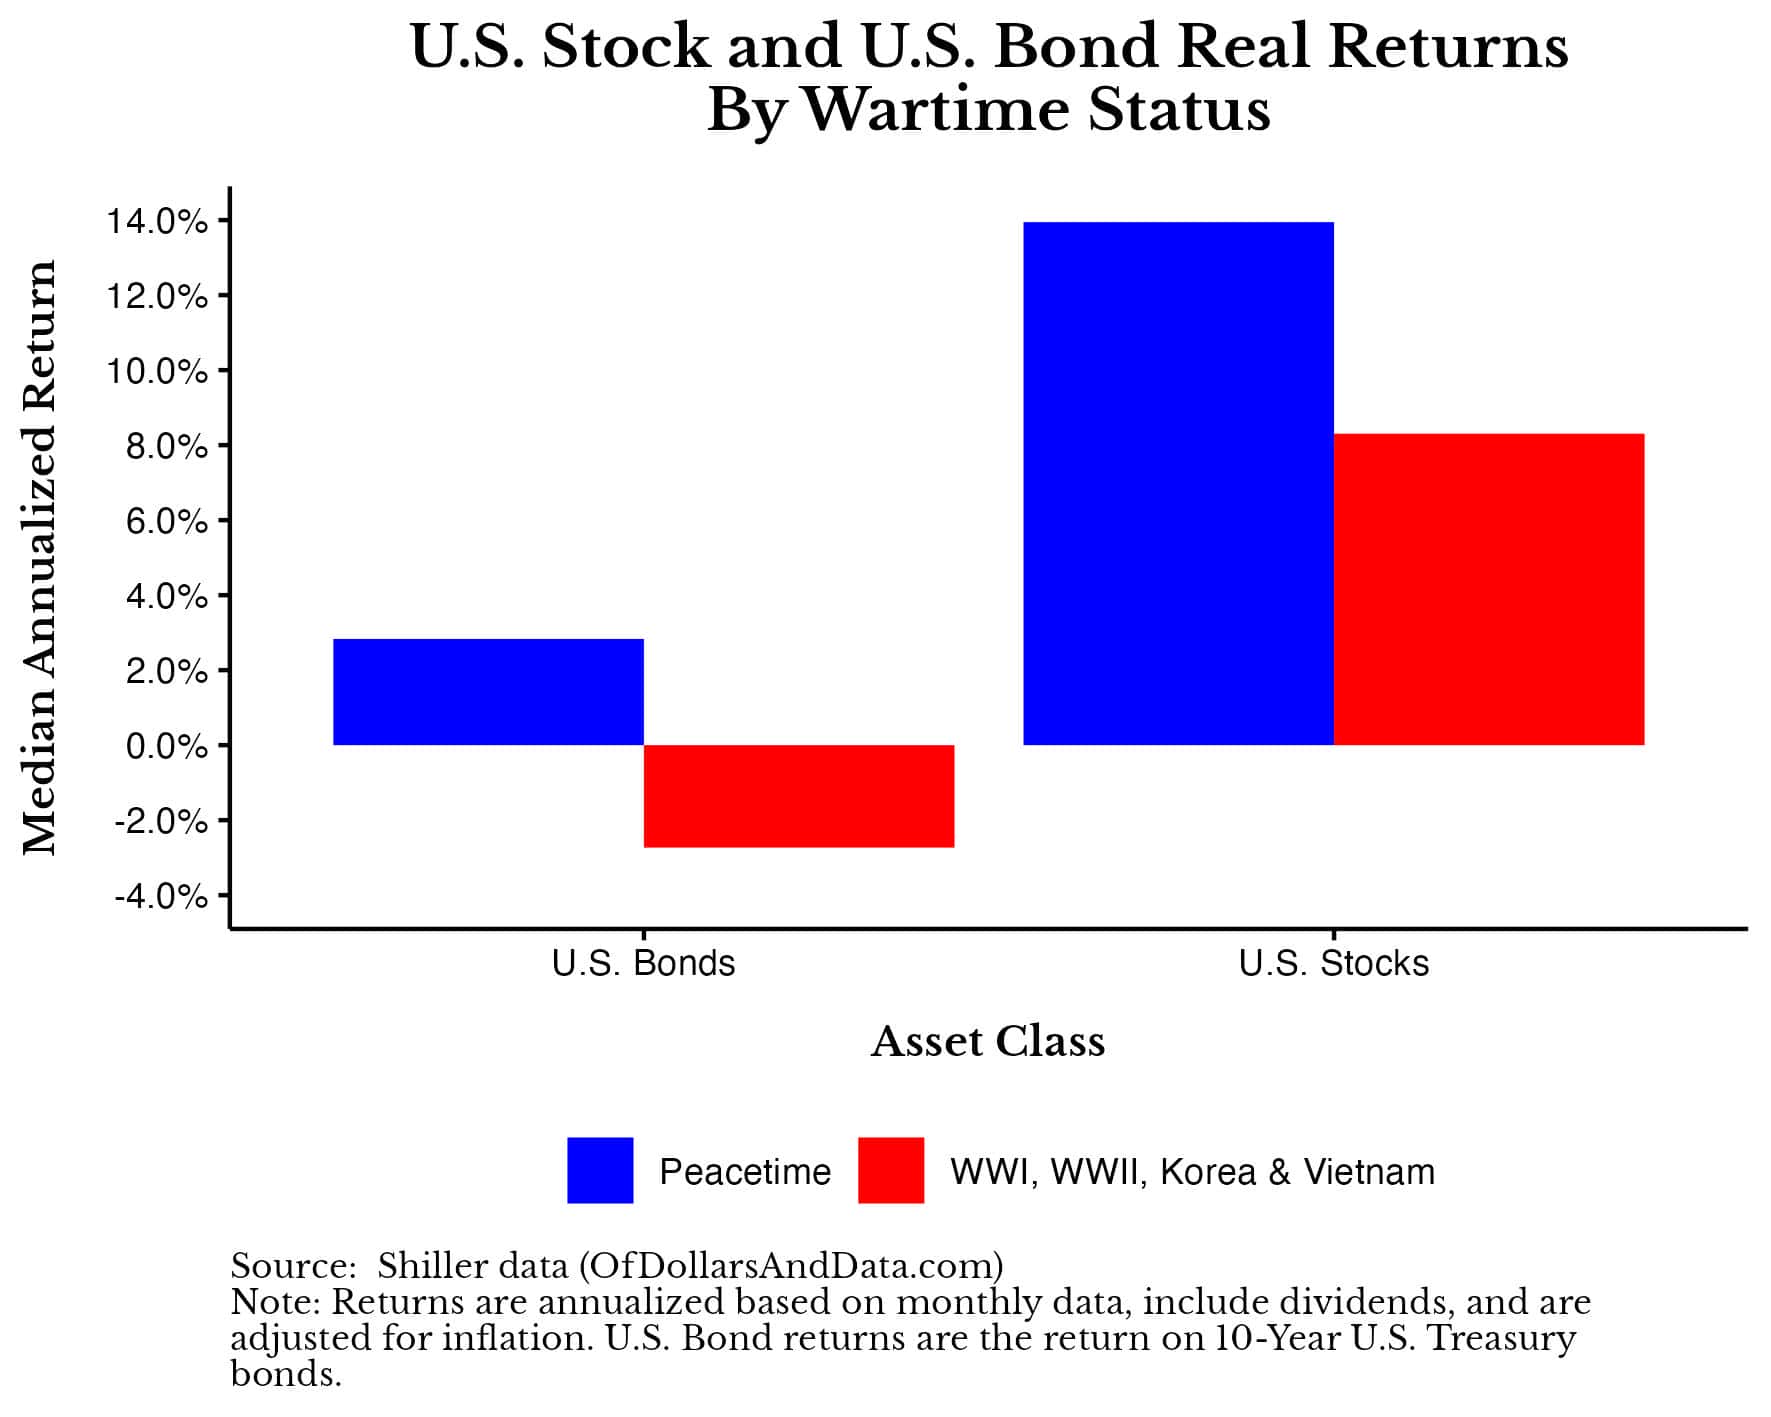 Chart of real US stock and bond returns during war and peacetime going back to 1900 (for WWI, WWII, Korea, and Vietnam).